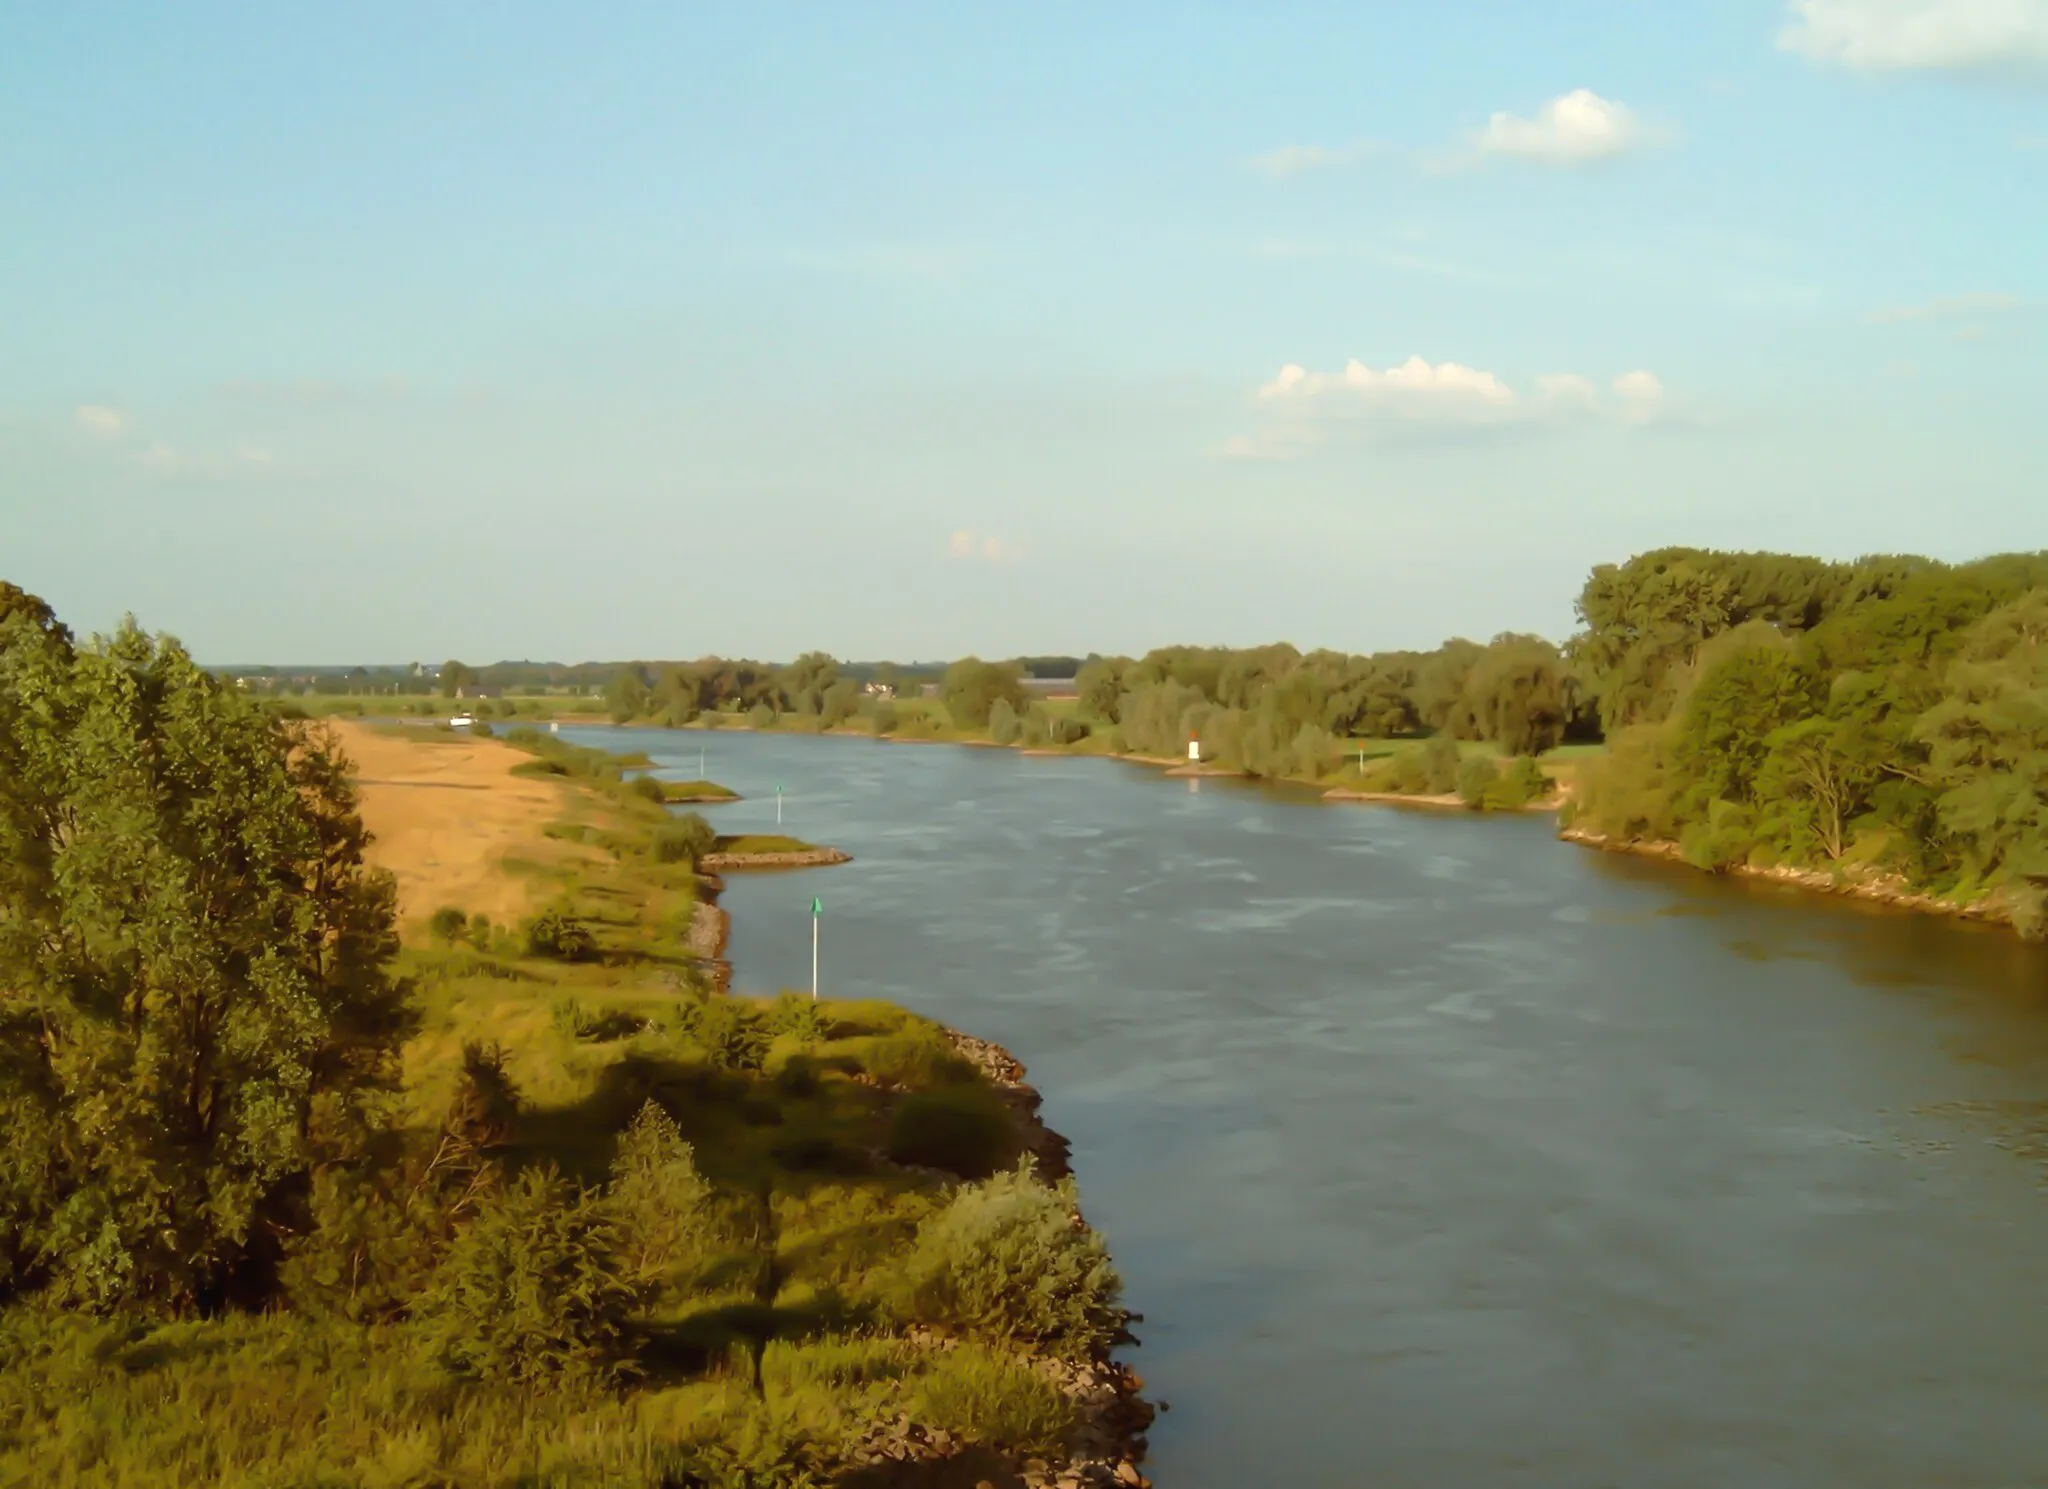 Photo showing: The IJssel river near Velp, the Netherlands